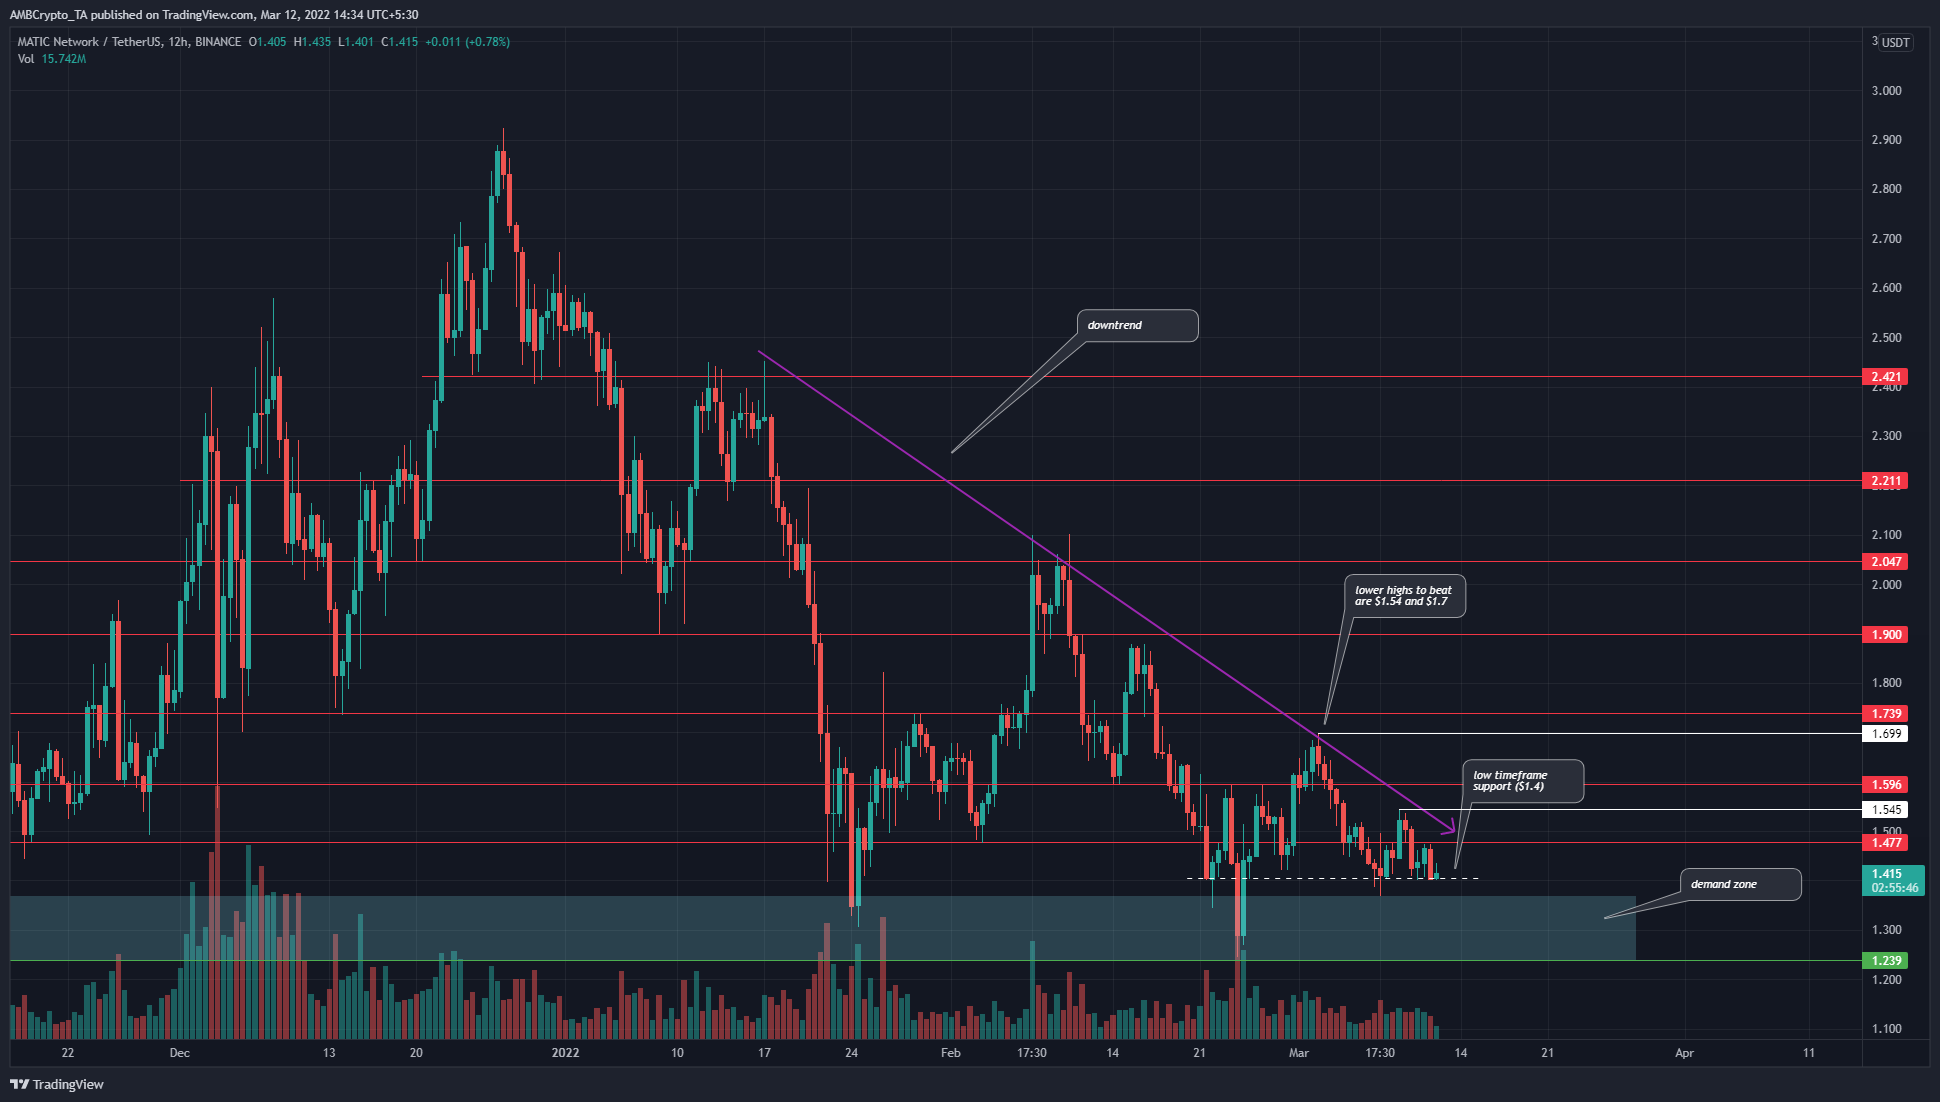 MATIC trading on a precarious support level- will the downtrend continue?